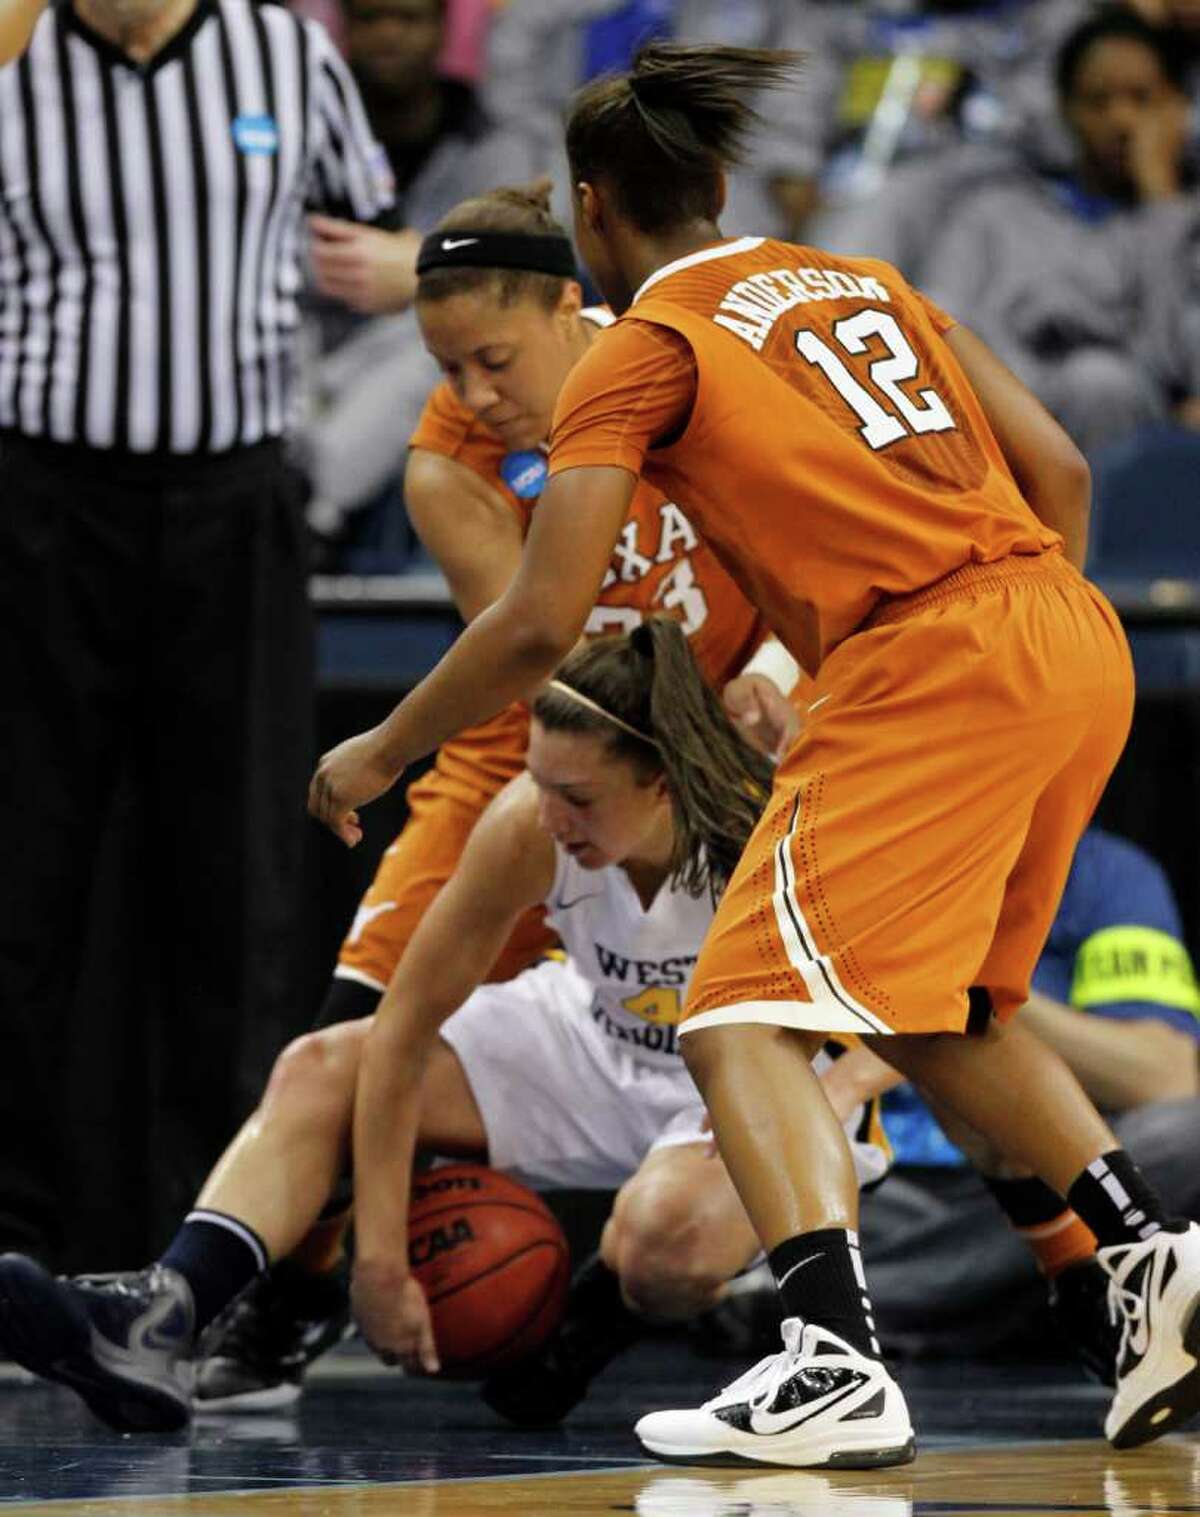 West Virginia guard Brooke Hampton (4) tries to guard the ball as Texas guard Yvonne Anderson (12) and Ashleigh Fontenette (33) close in during the first half of a first-round NCAA tournament women's college basketball game in Norfolk, Va., Saturday, March 17, 2012. (AP Photo/Steve Helber)